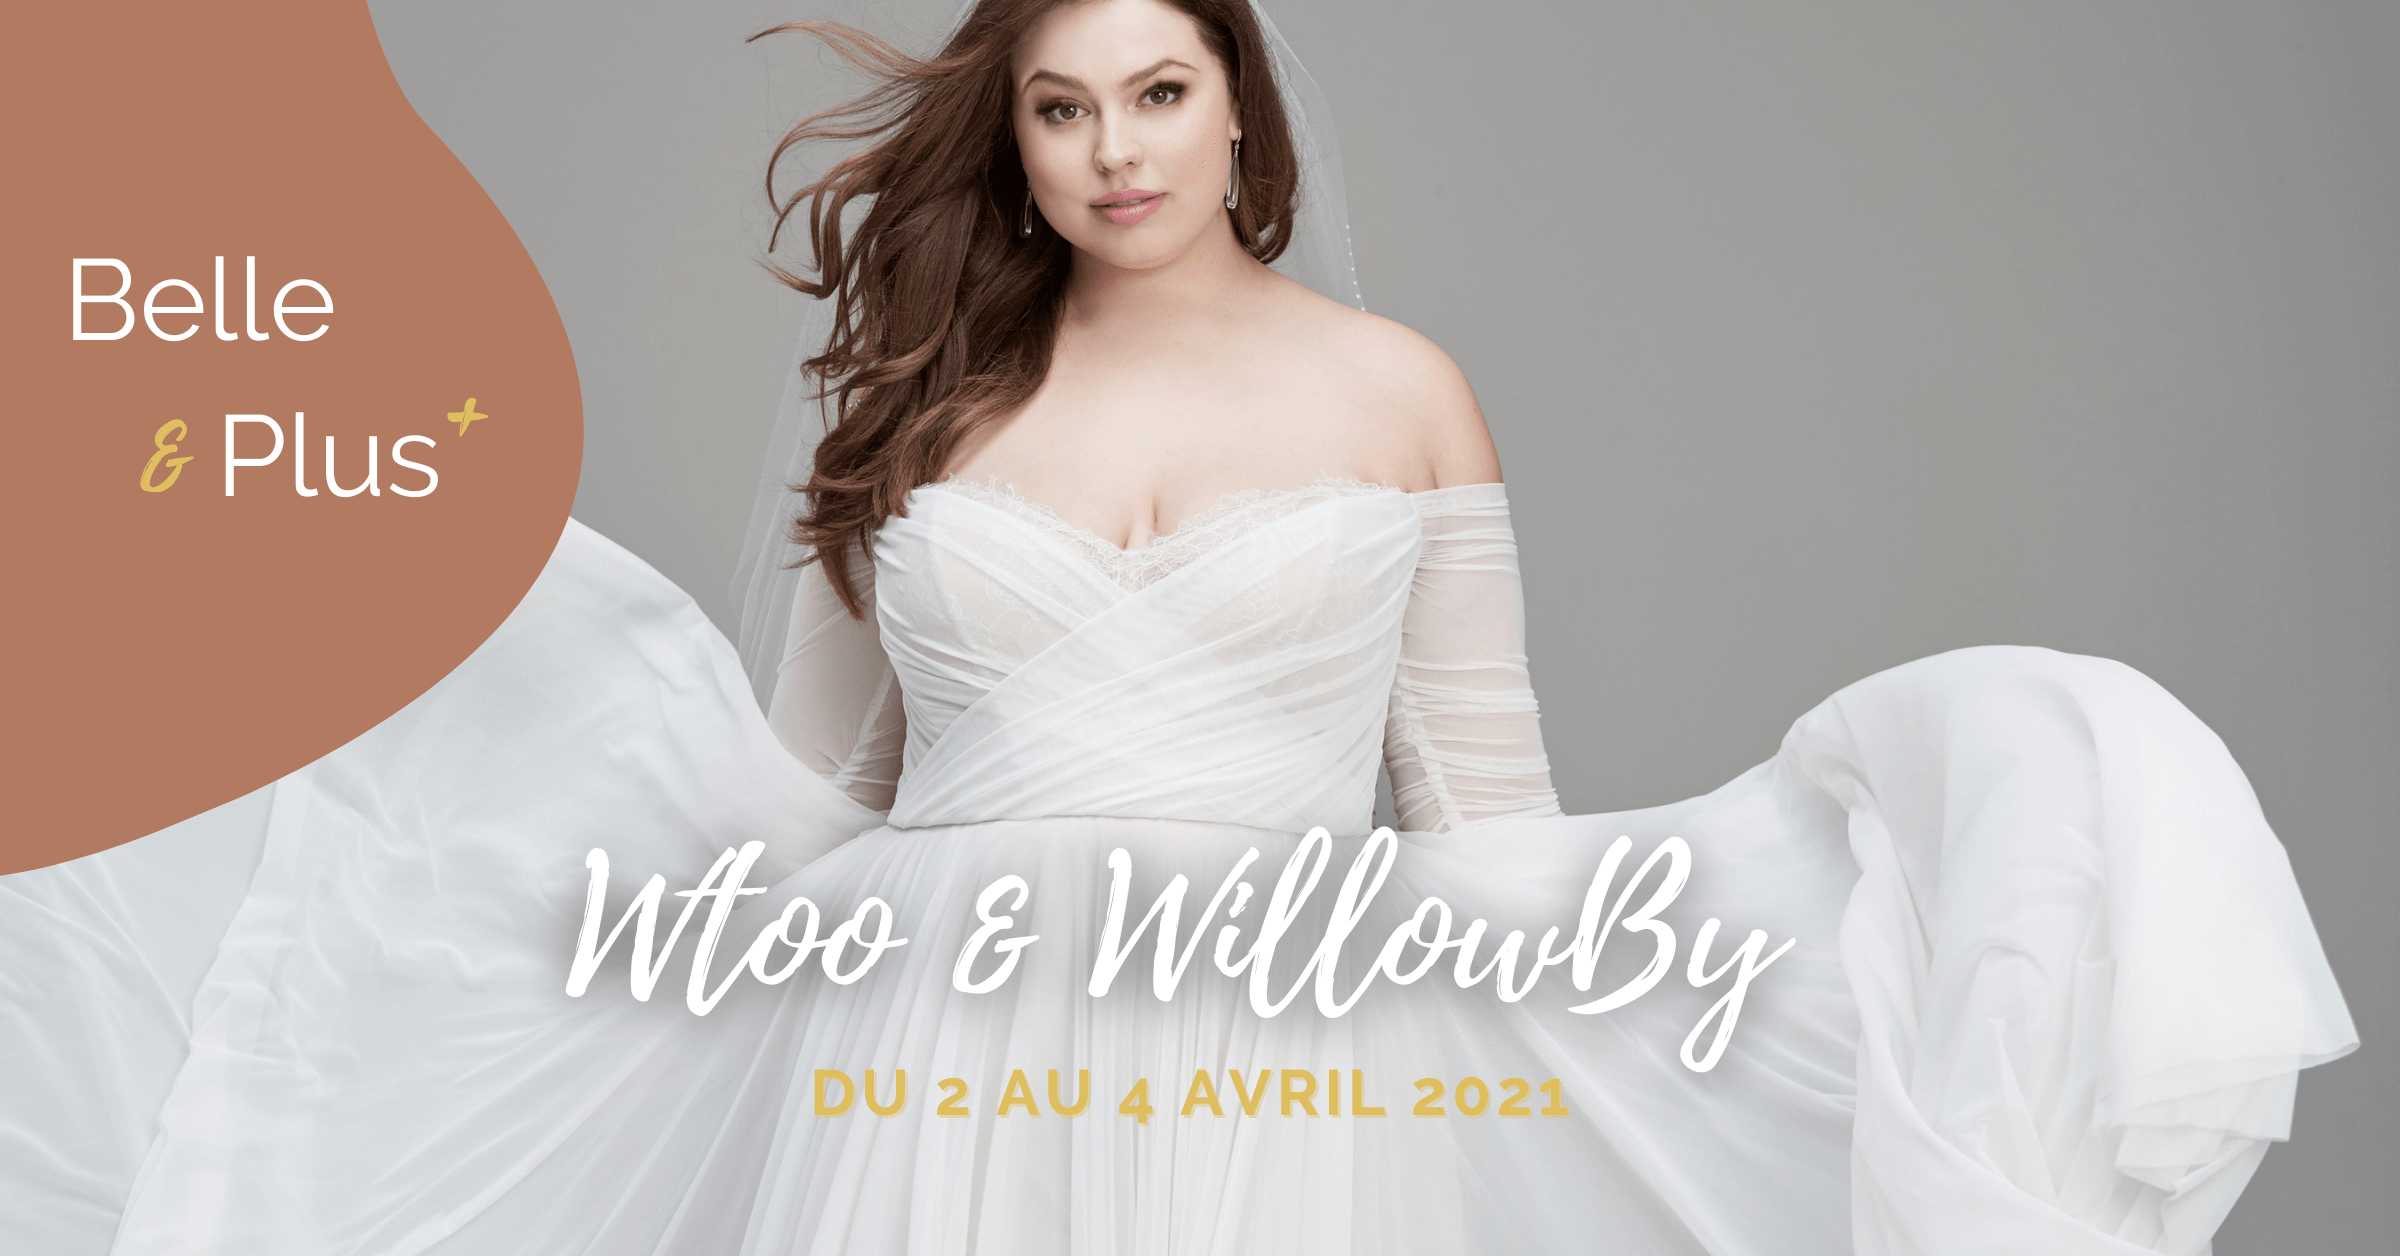 Wtoo & WillowBy – Grande taille du 2 au 4 avril